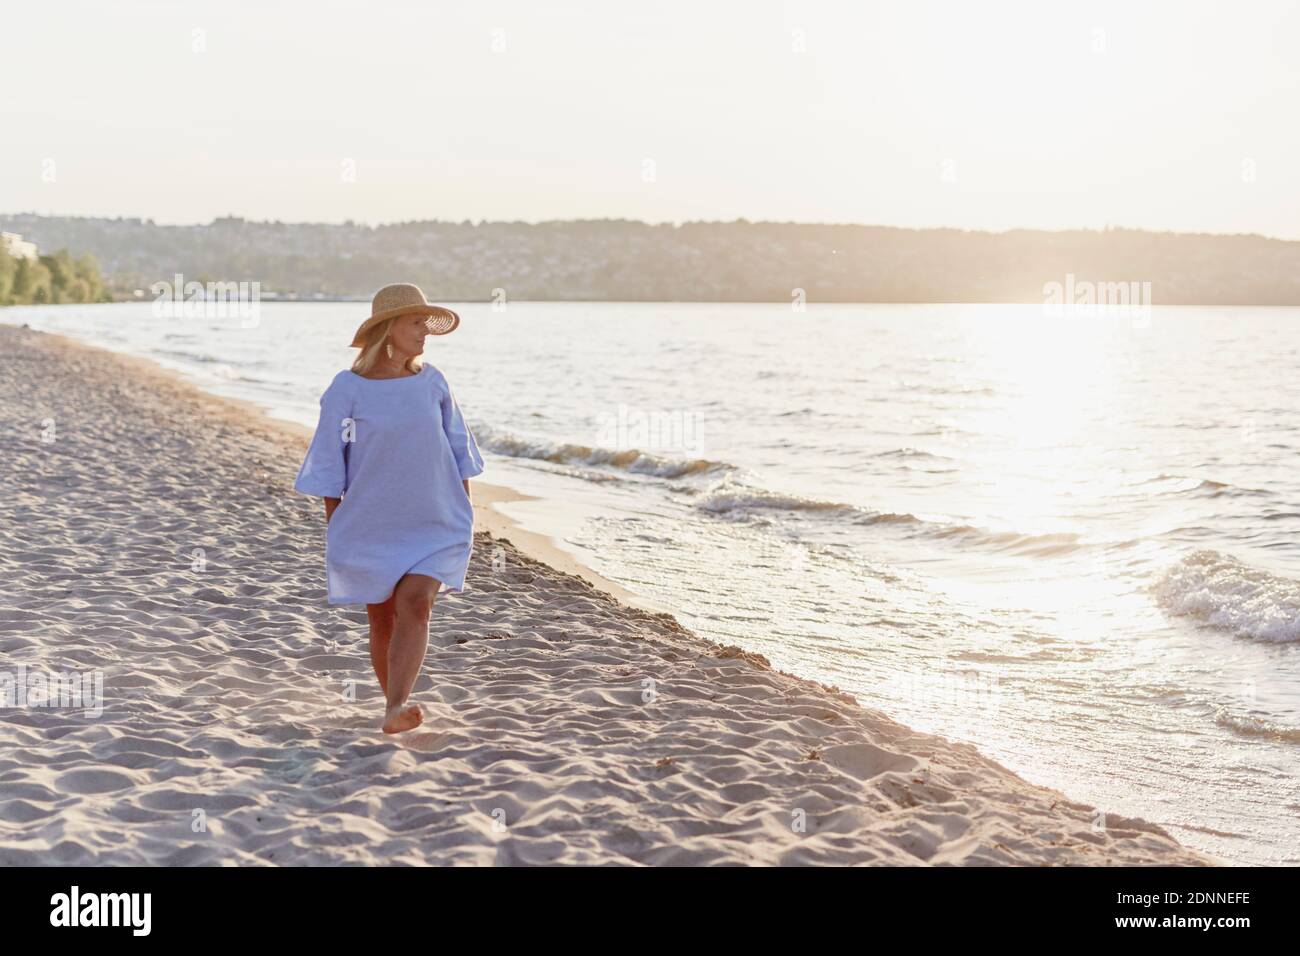 Woman walking on beach Banque D'Images